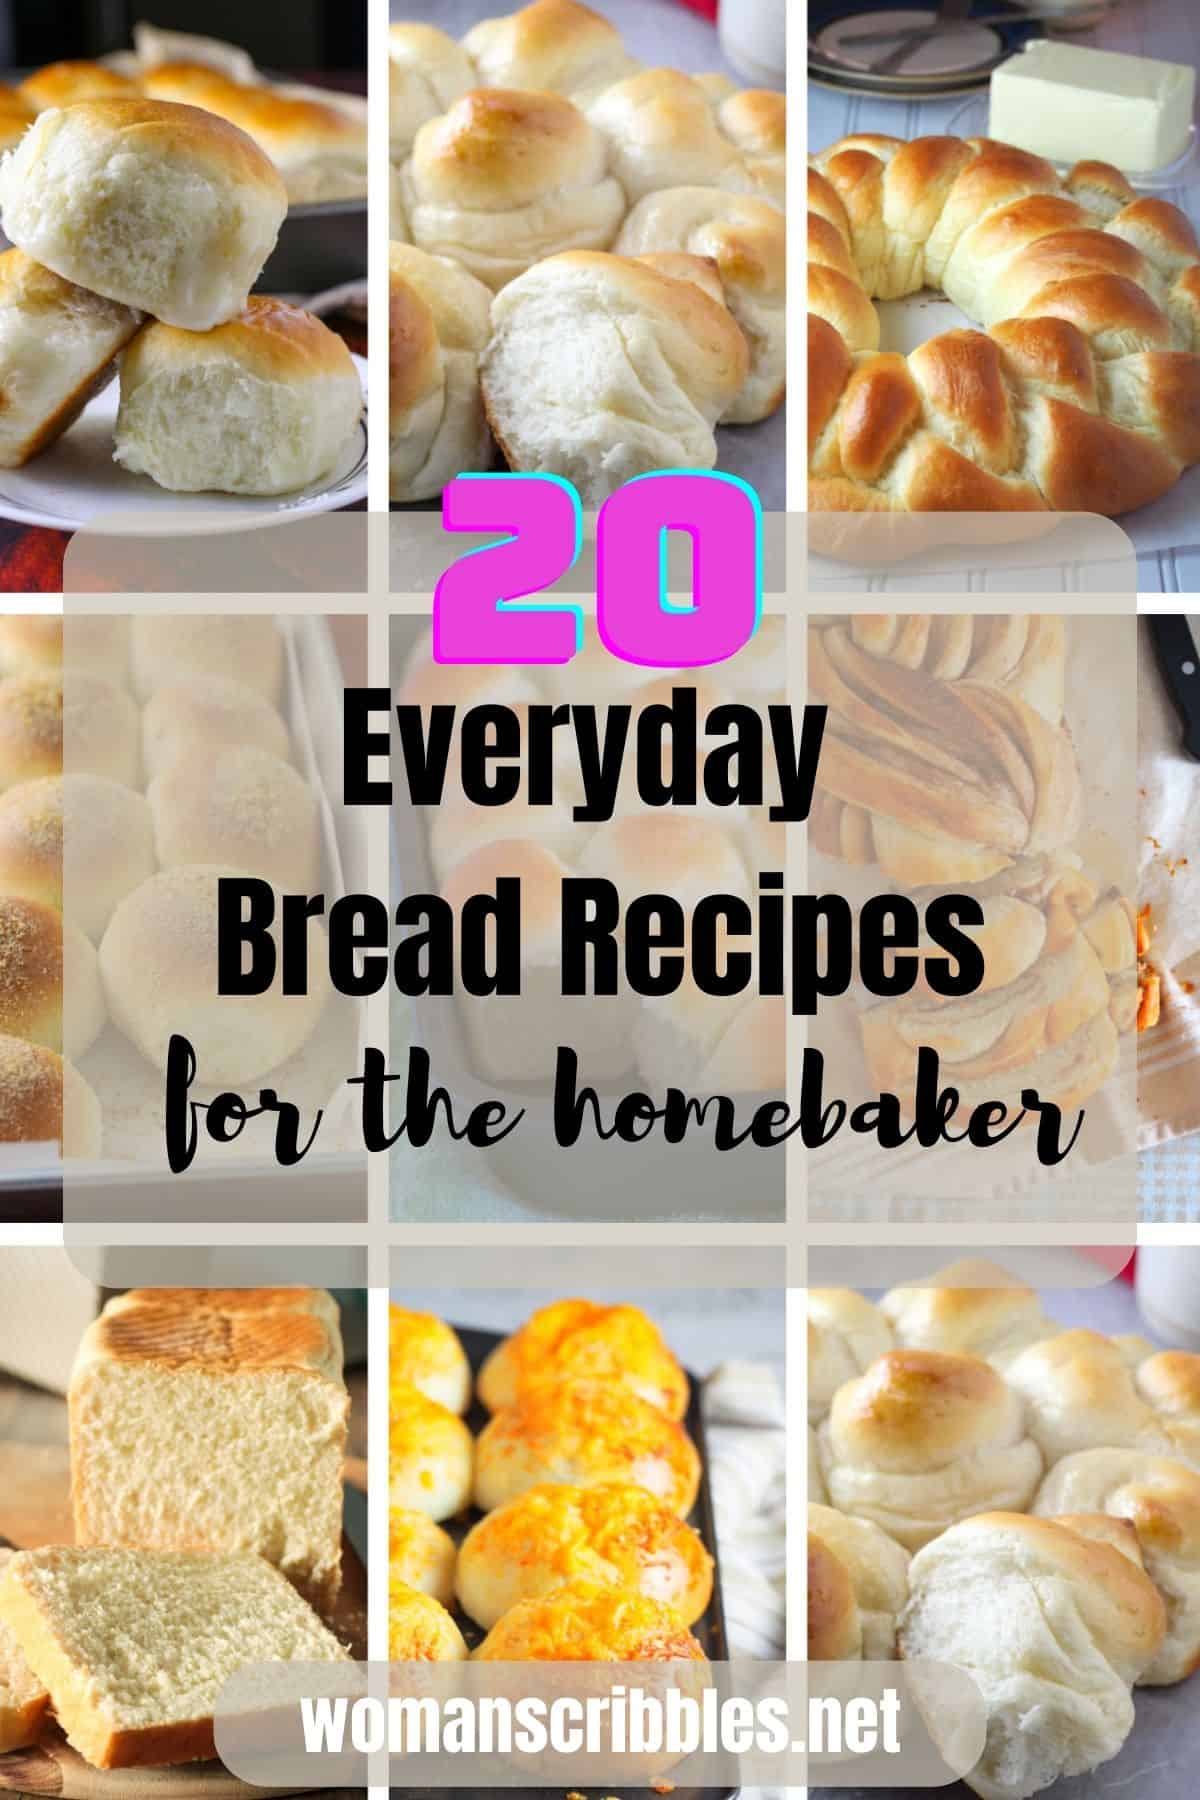 A collage of everyday bread recipes.